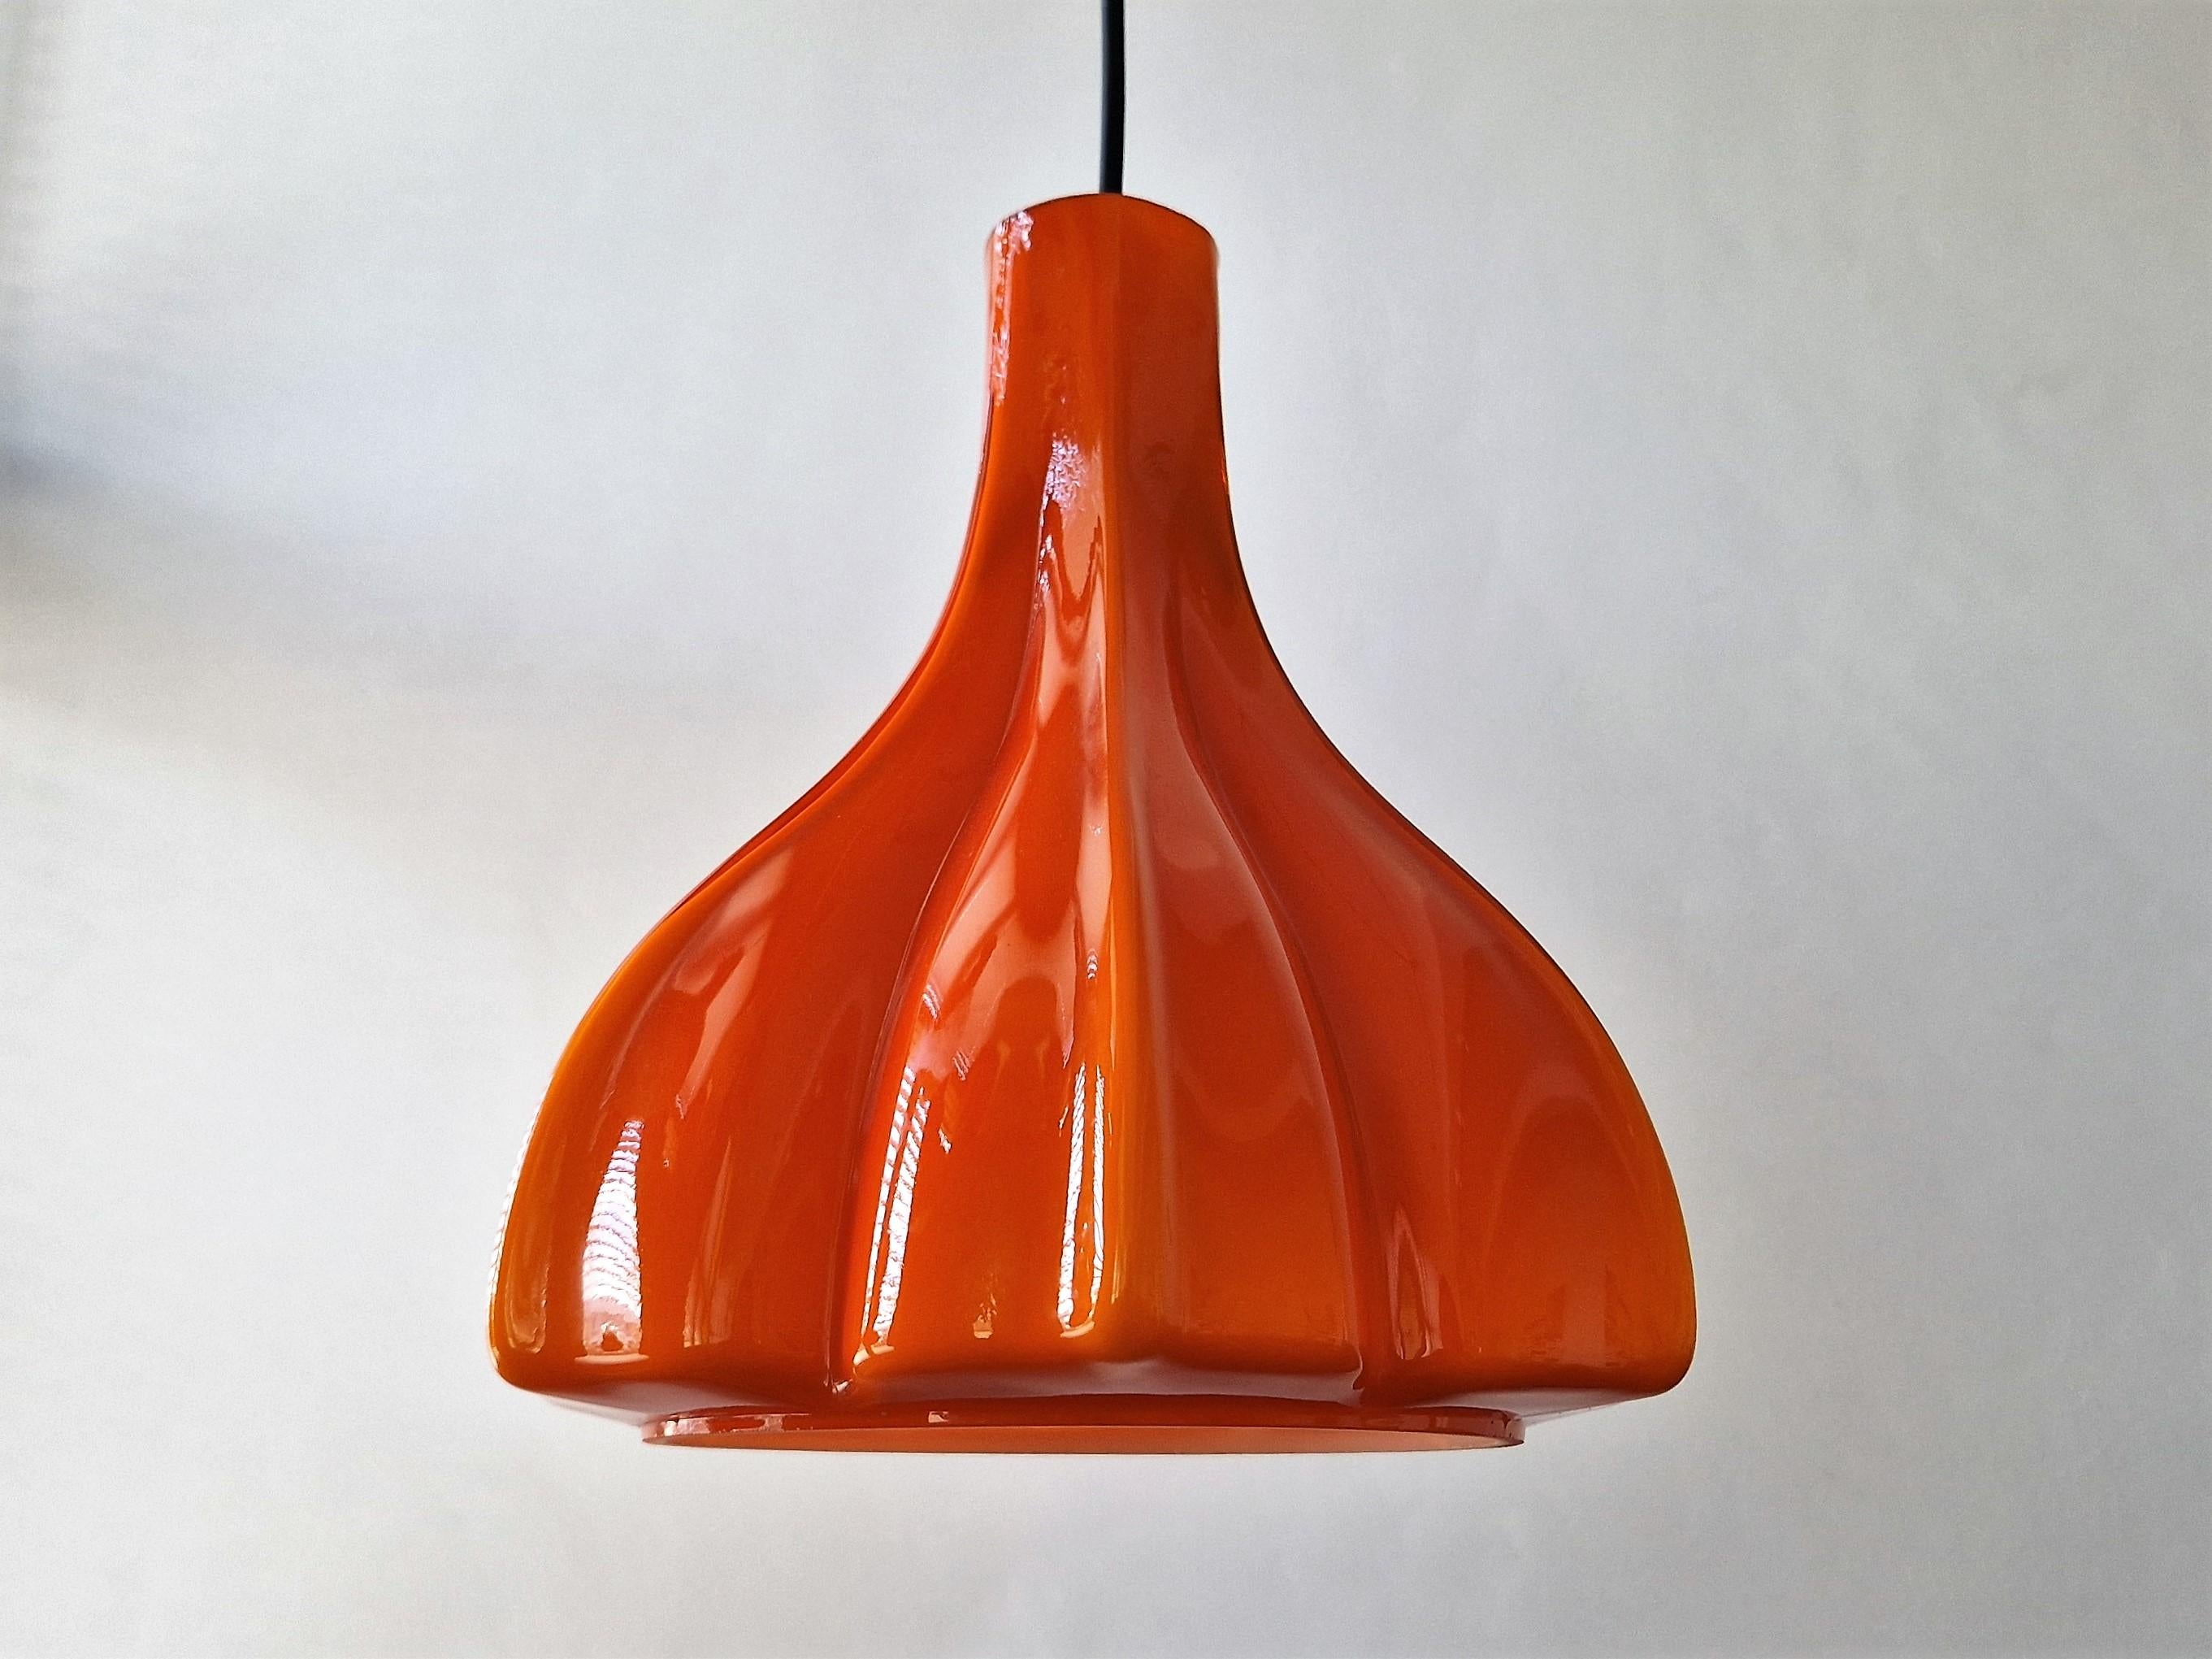 This beautiful flower shaped pendant lamp was made by the German manufacturer Peill & Putzler. It is made of double-layerd hand blown Murano glass with an orange outside and an opal white inside. When lit it creates a warm and atmospheric glow of